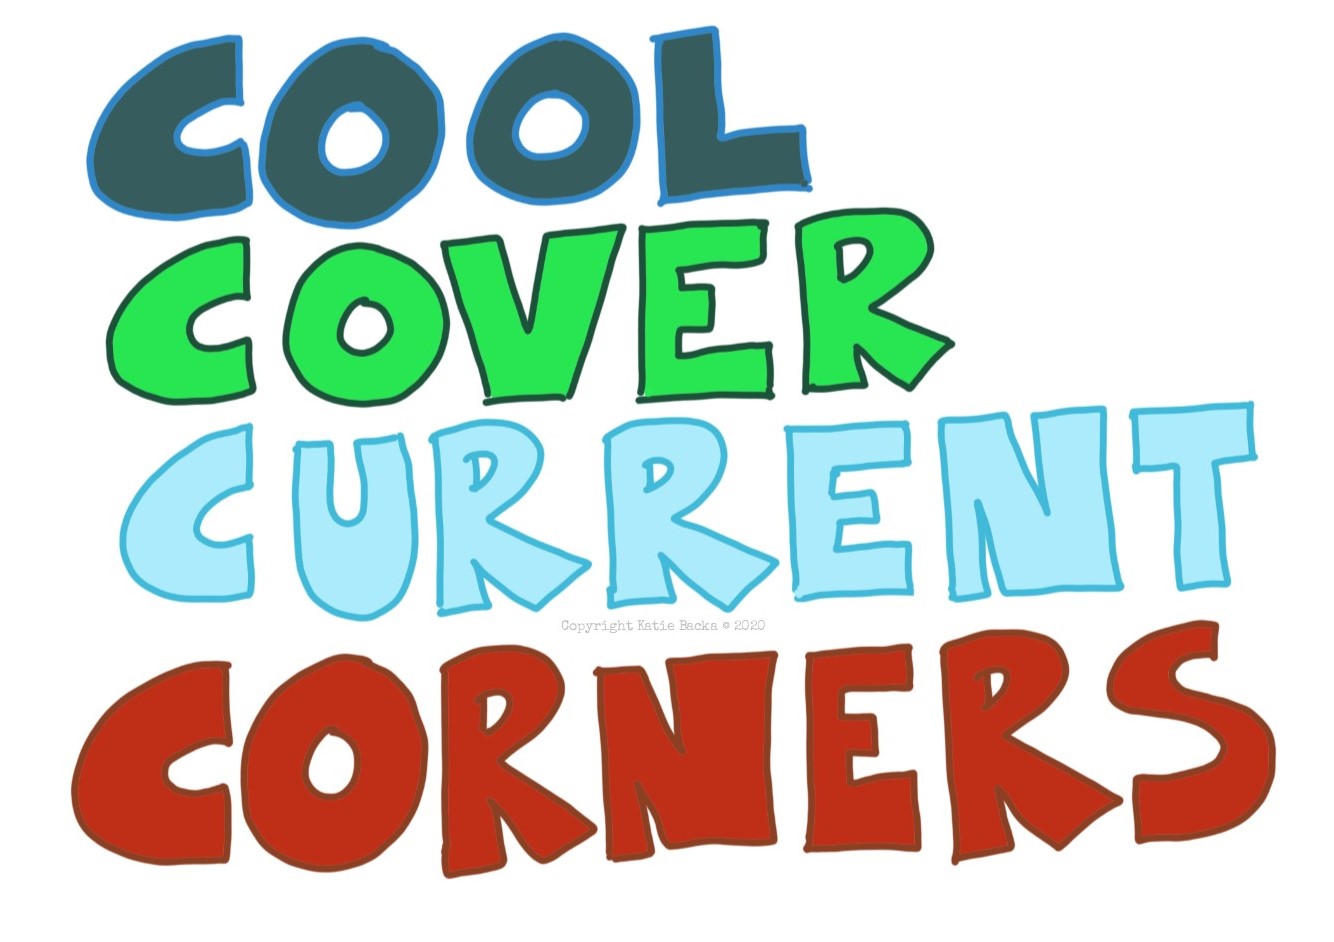 text: Cool, cover, current, corners